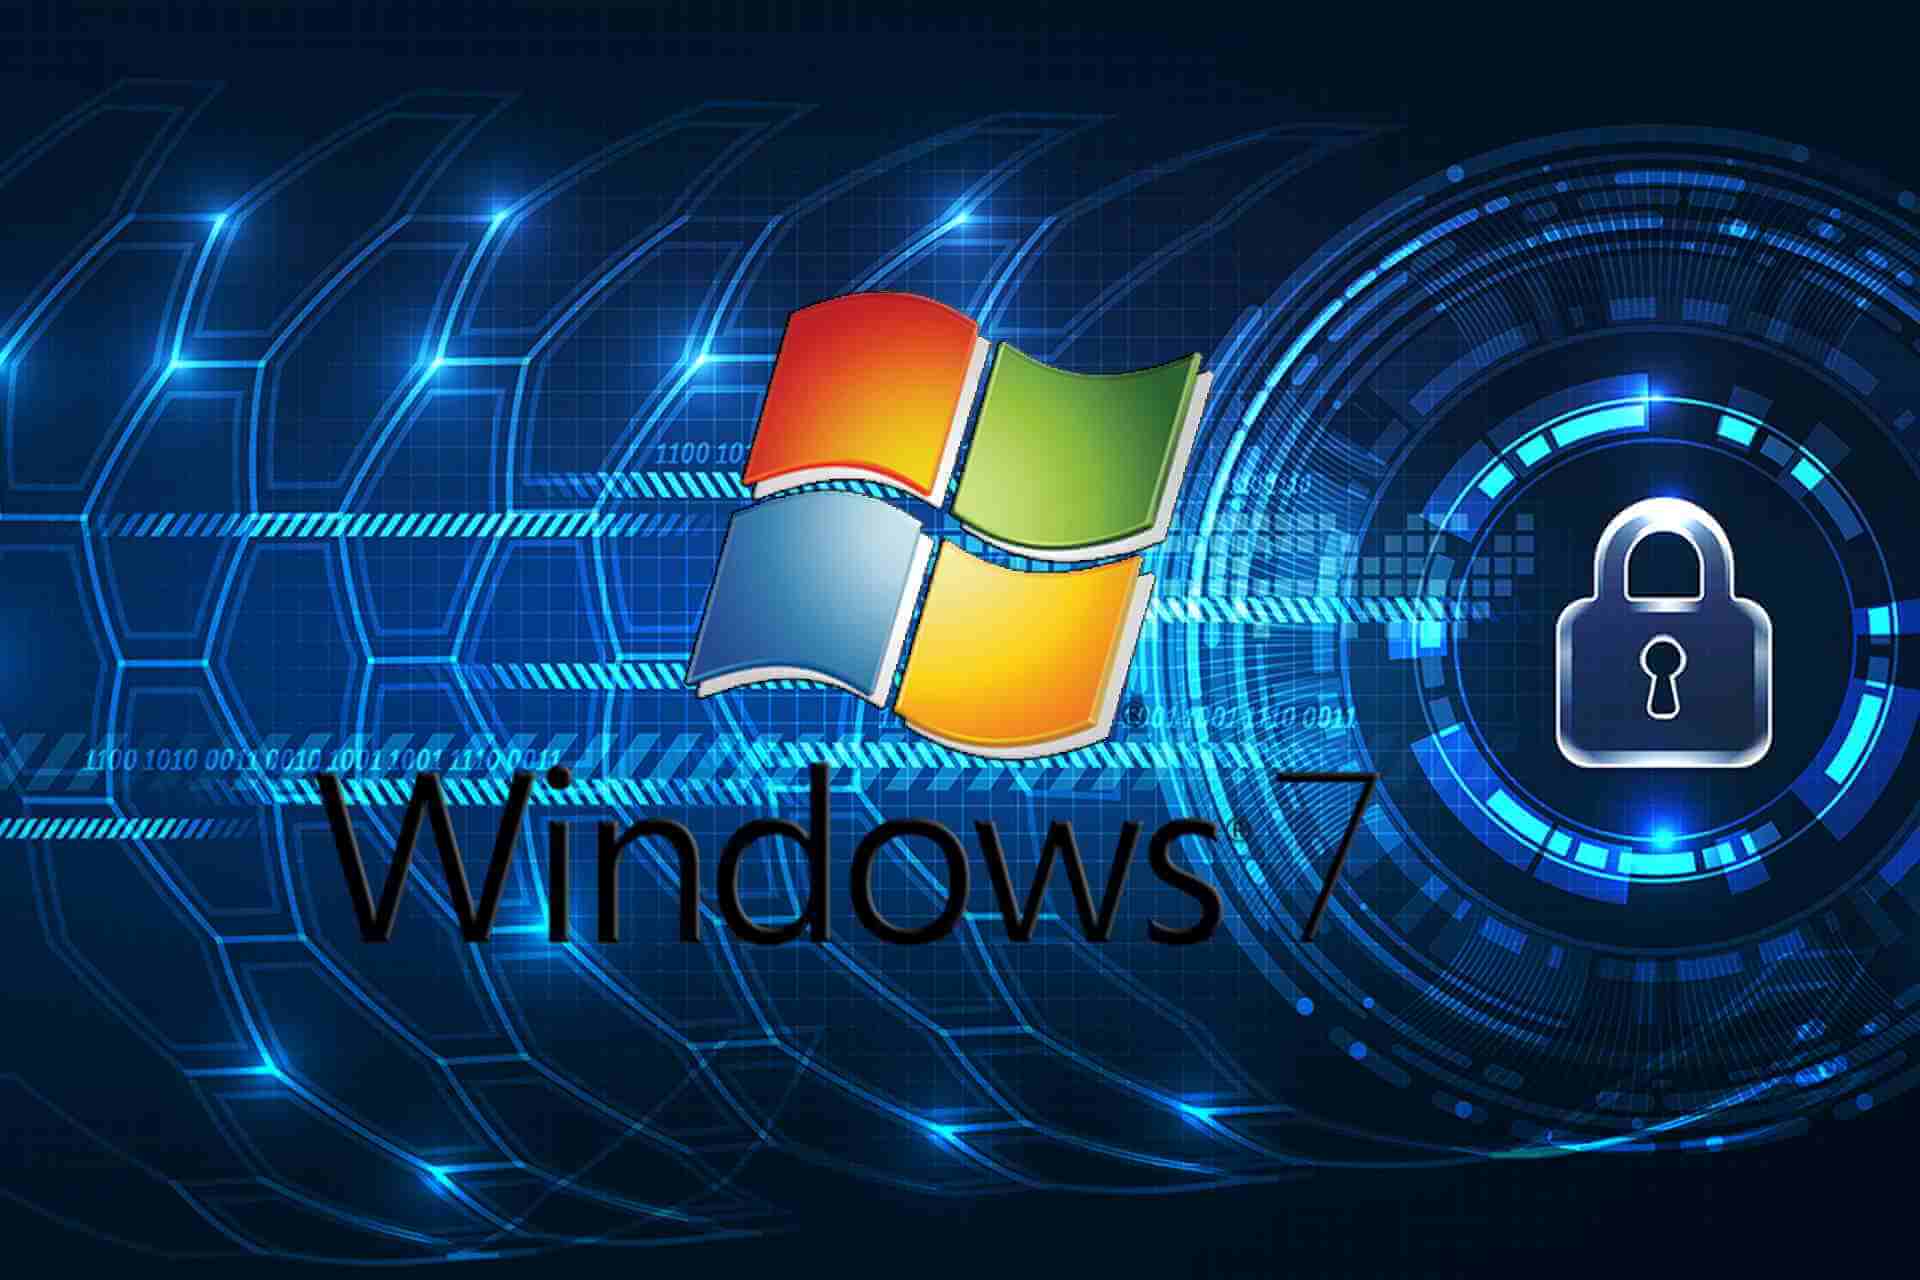 antivirus for pc free download for windows 7